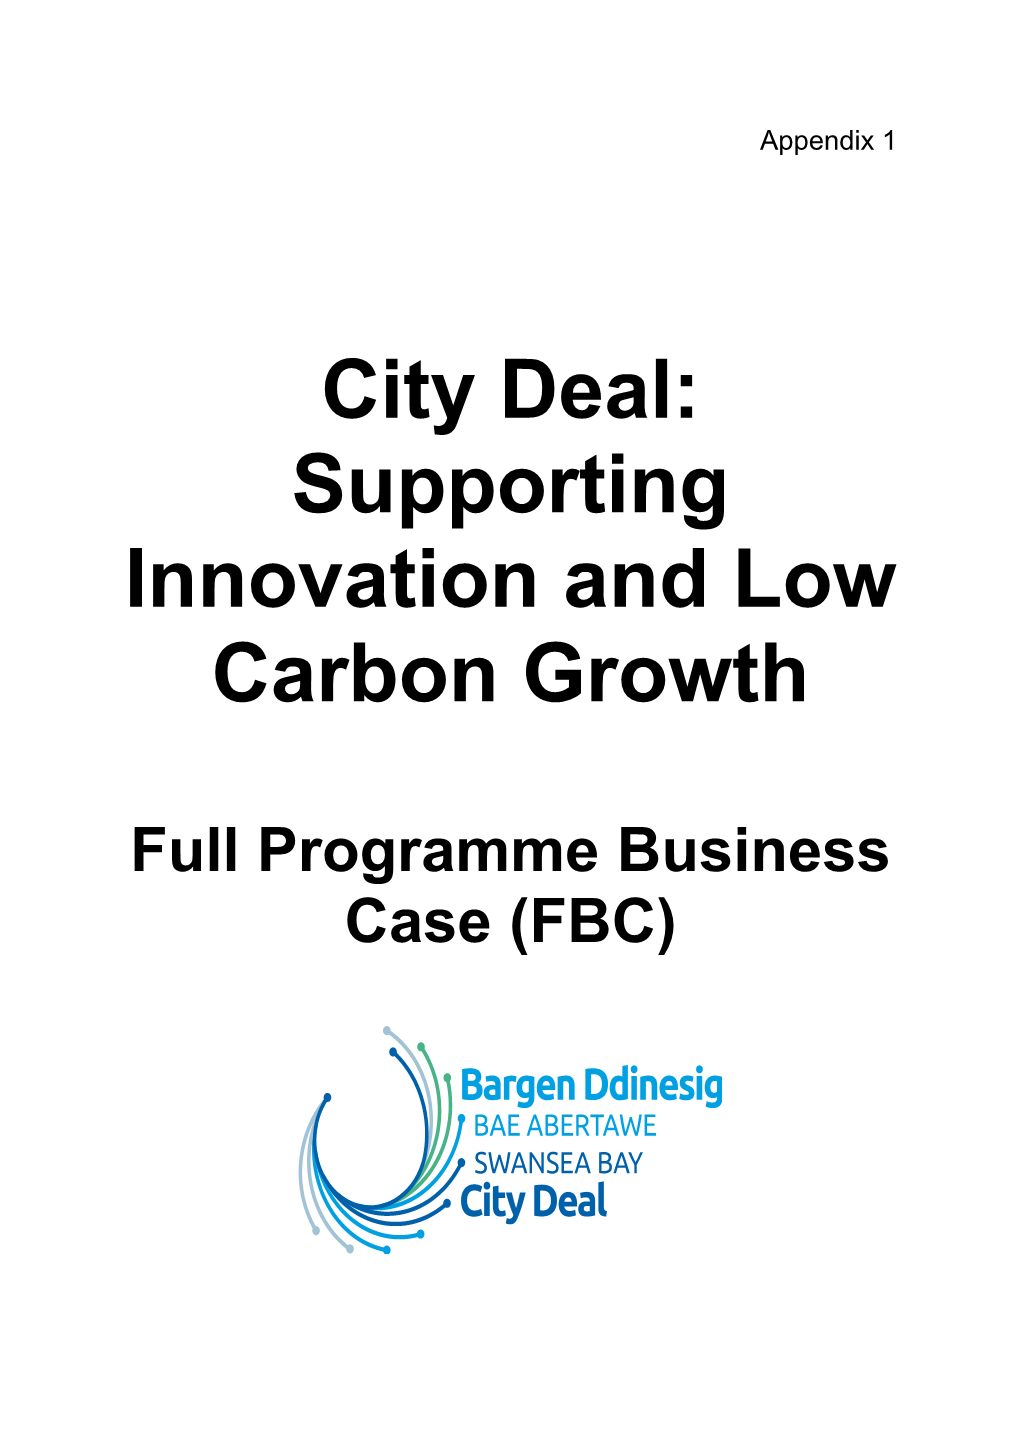 City Deal: Supporting Innovation and Low Carbon Growth